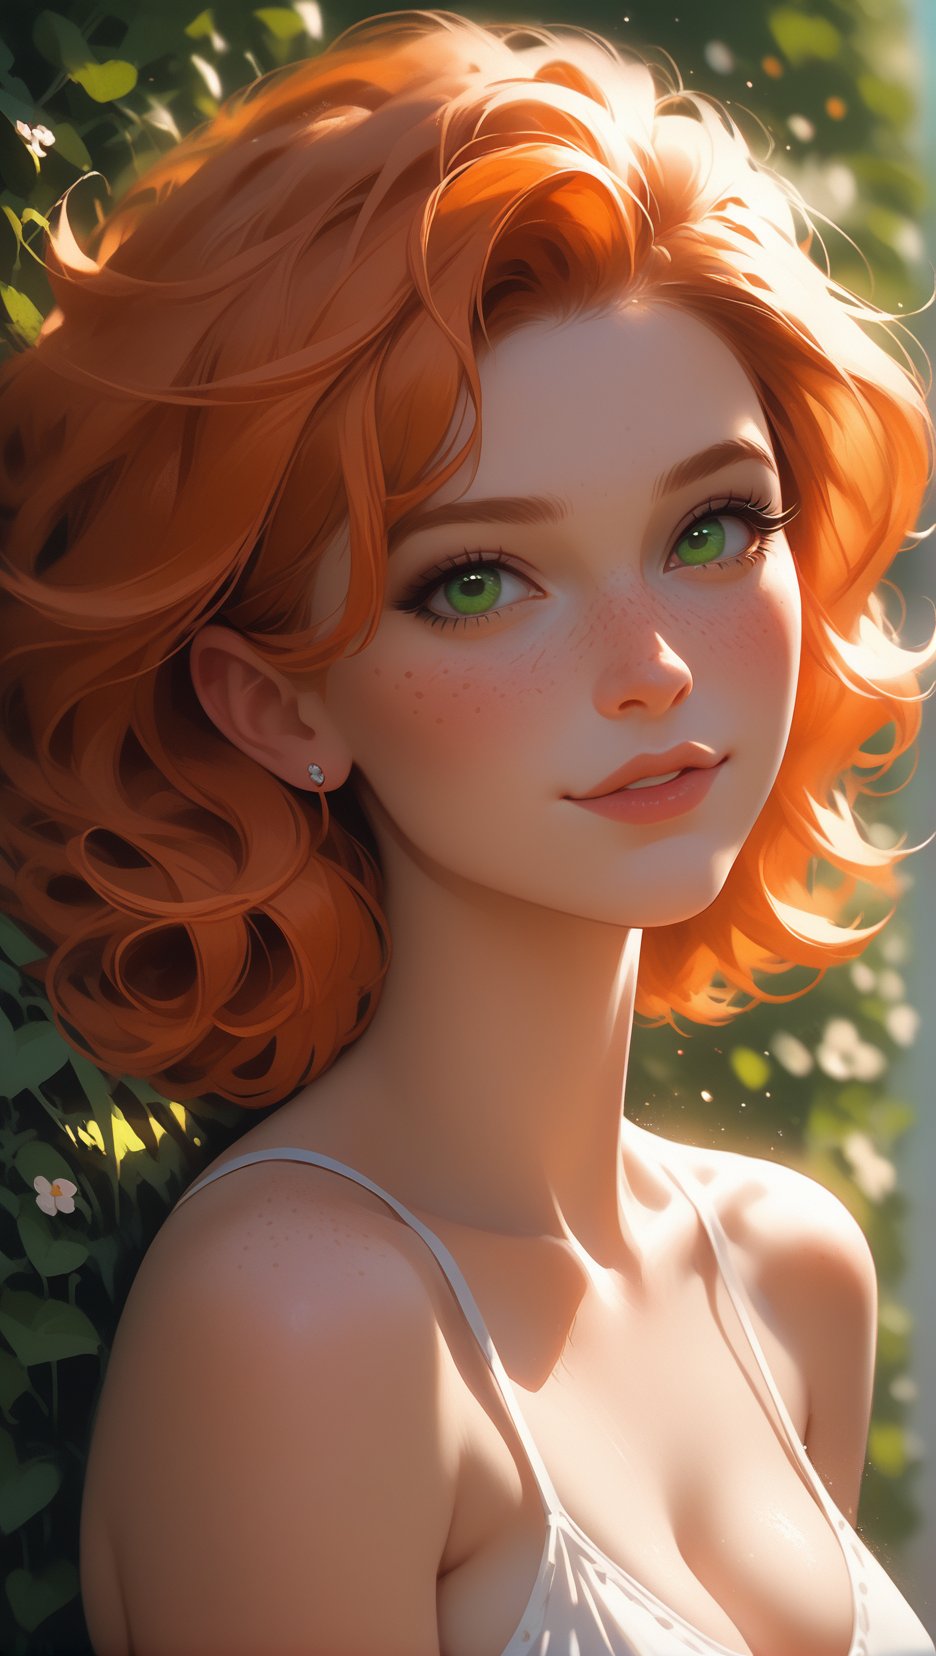 score_9, score_8_up, score_7_up, rating_questionable,Woman, freckles, extremely attractive, adorable, extremely pale skin, orange hair, green eyes, light directed at face, 8k